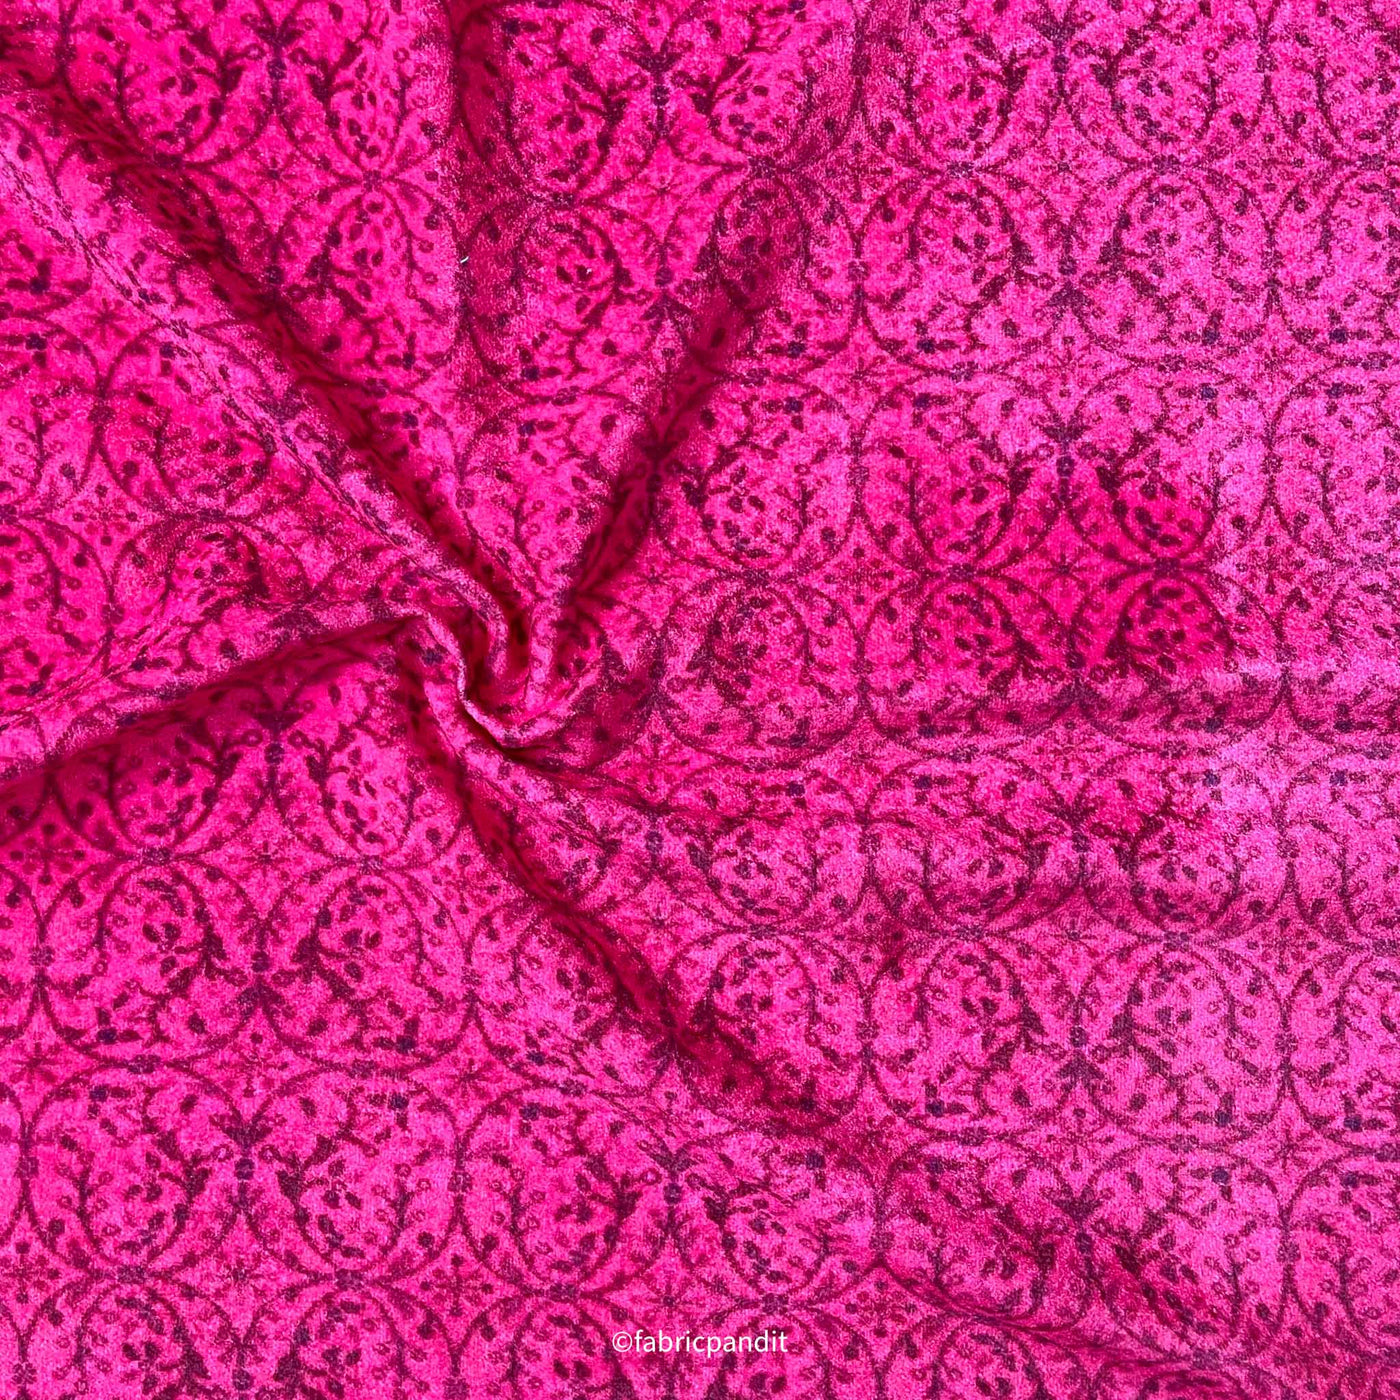 Printed Velvet Fabric Cut Piece (CUT PIECE) Ruby Red Abstract Floral Digital Print Pure Velvet Fabric (Width 44 Inches)